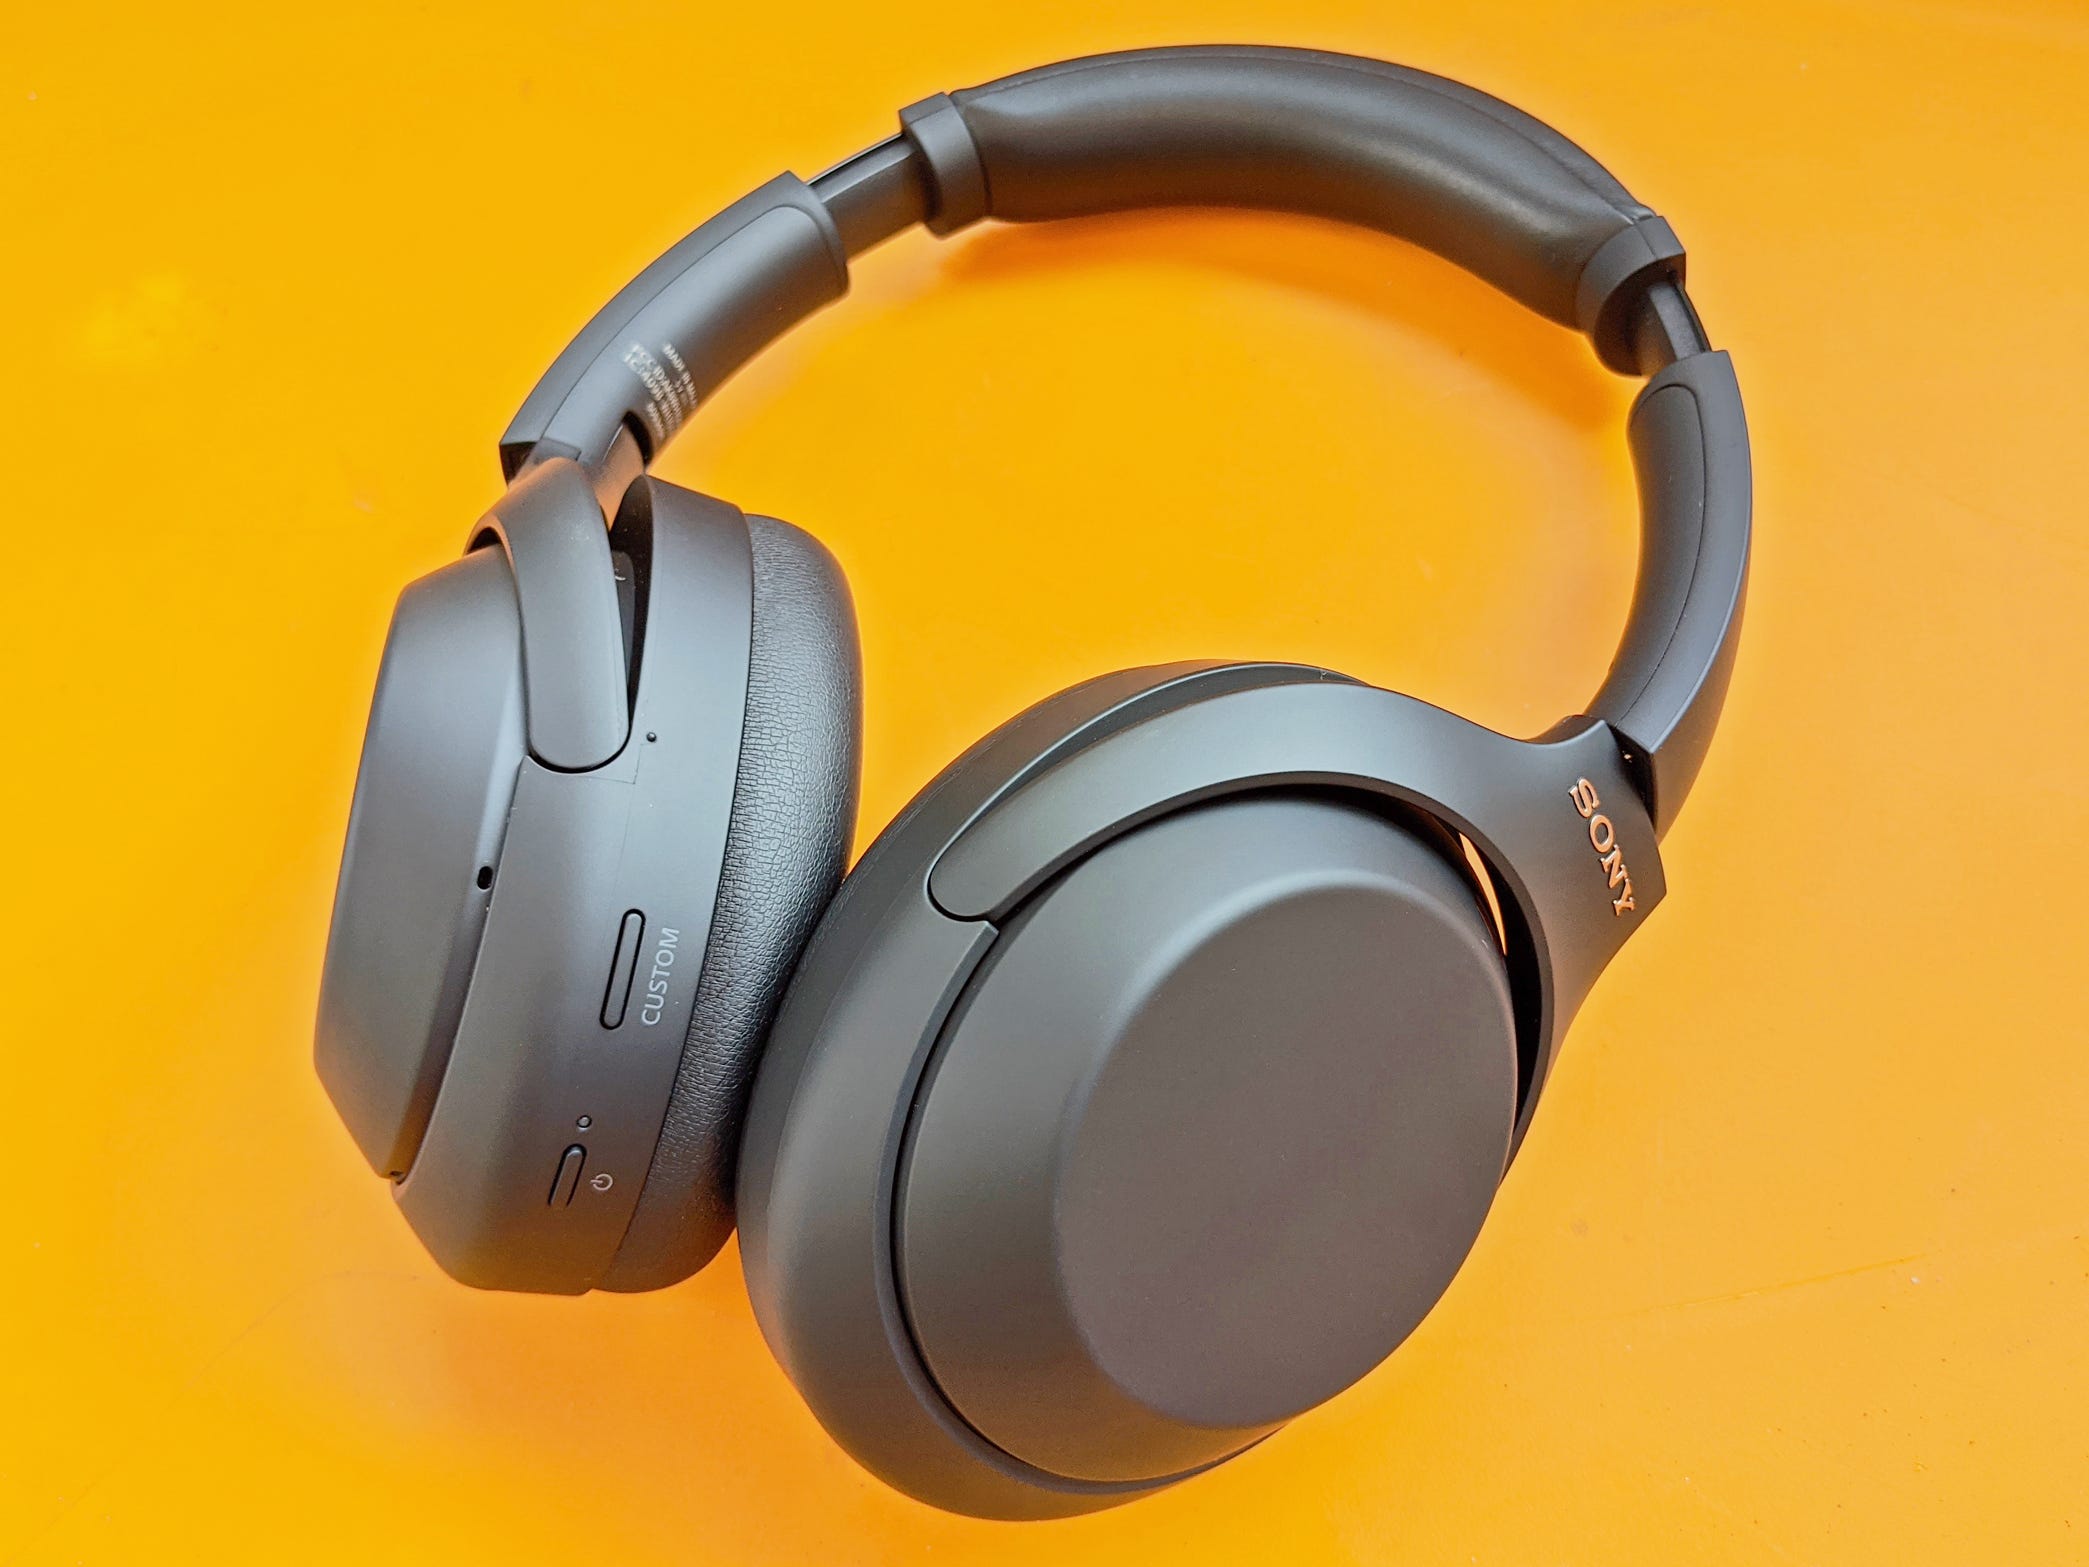 Seriously, why aren’t you buying the best headphones in the world at